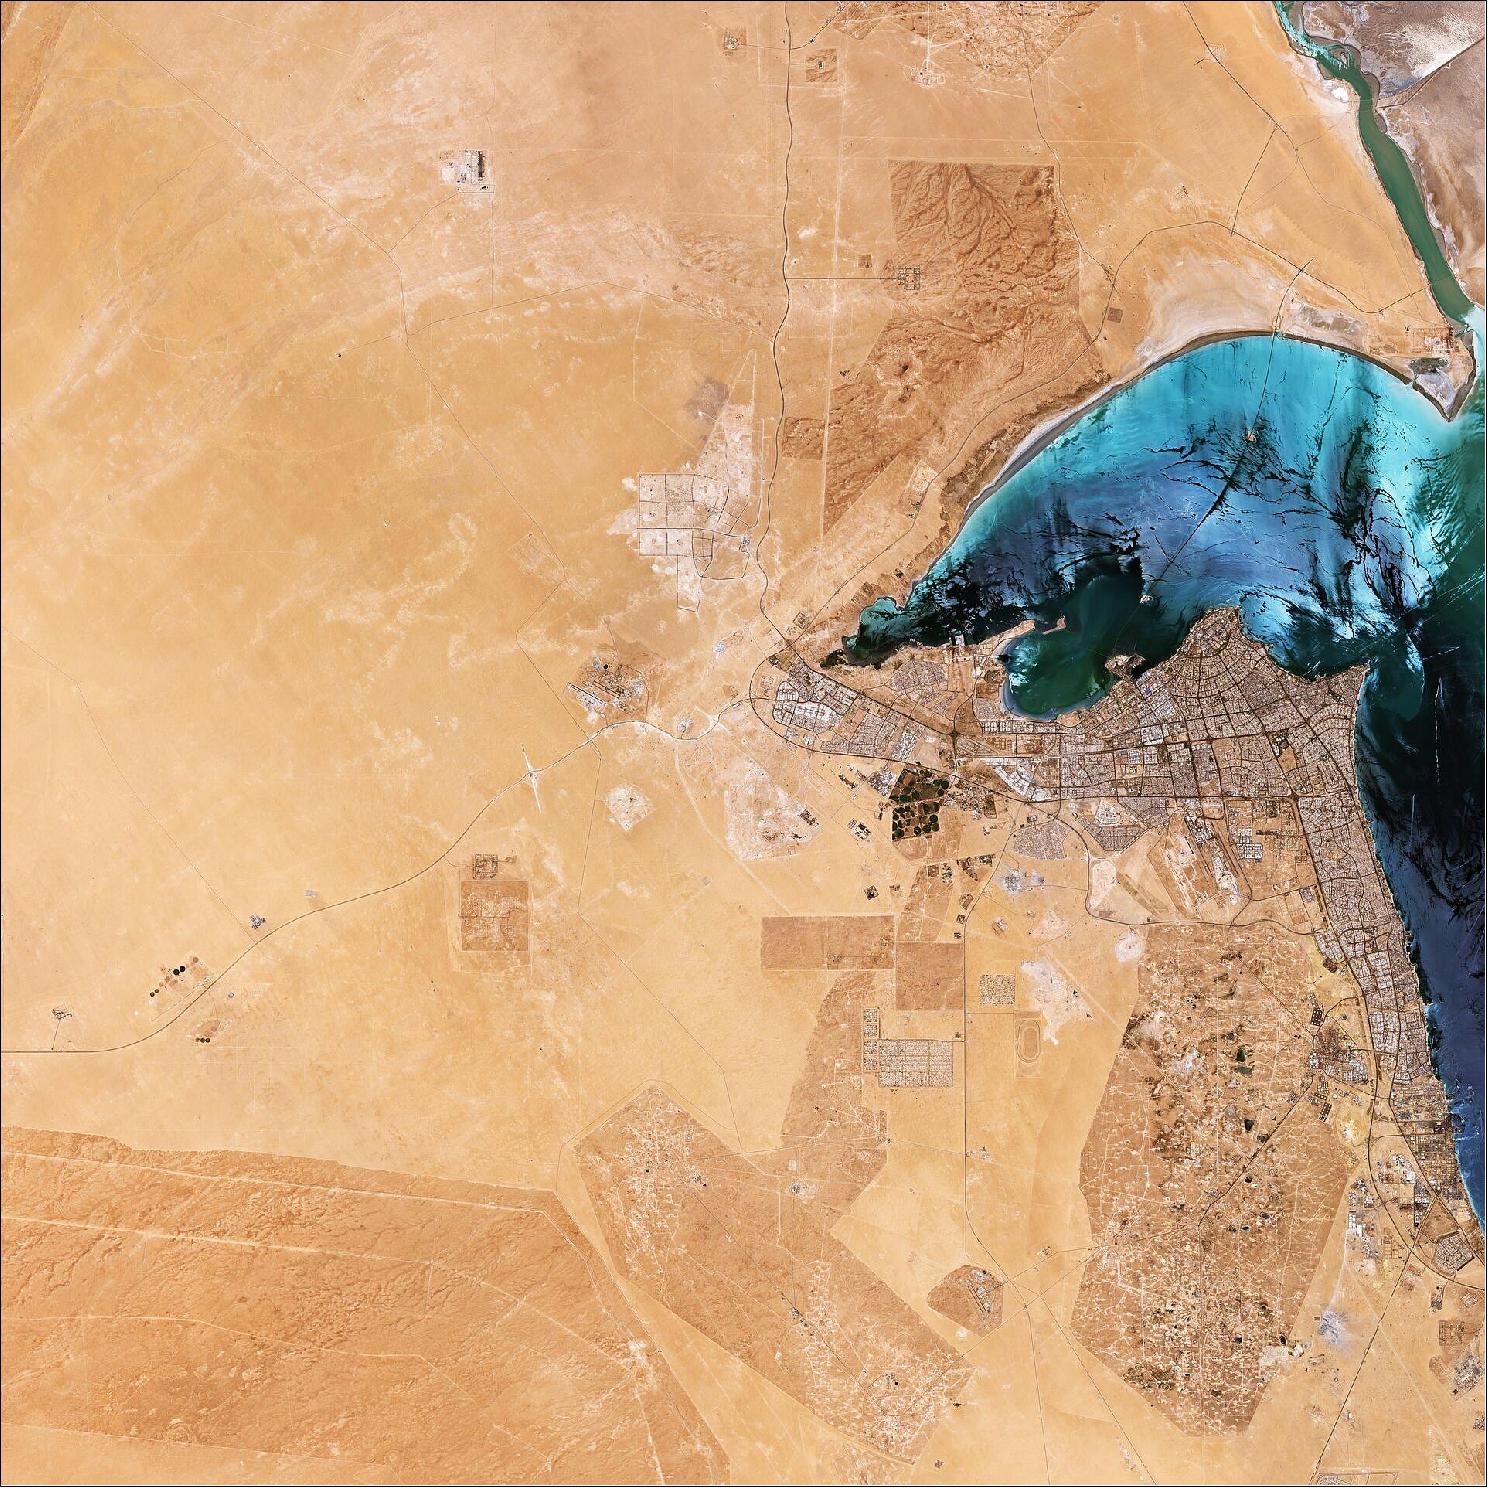 Figure 55: The flat, sandy Arabian Desert covers the majority of Kuwait and appears as a vast expanse of light sand-colored terrain in this image, captured on 25 July 2019. During the dry season, between April and September, the heat in the desert can be severe with daytime temperatures reaching 45ºC and, on occasion, over 50ºC. This image is also featured on the Earth from Space video program (image credit: ESA, the image contains modified Copernicus Sentinel data (2019), processed by ESA, CC BY-SA 3.0 IGO)